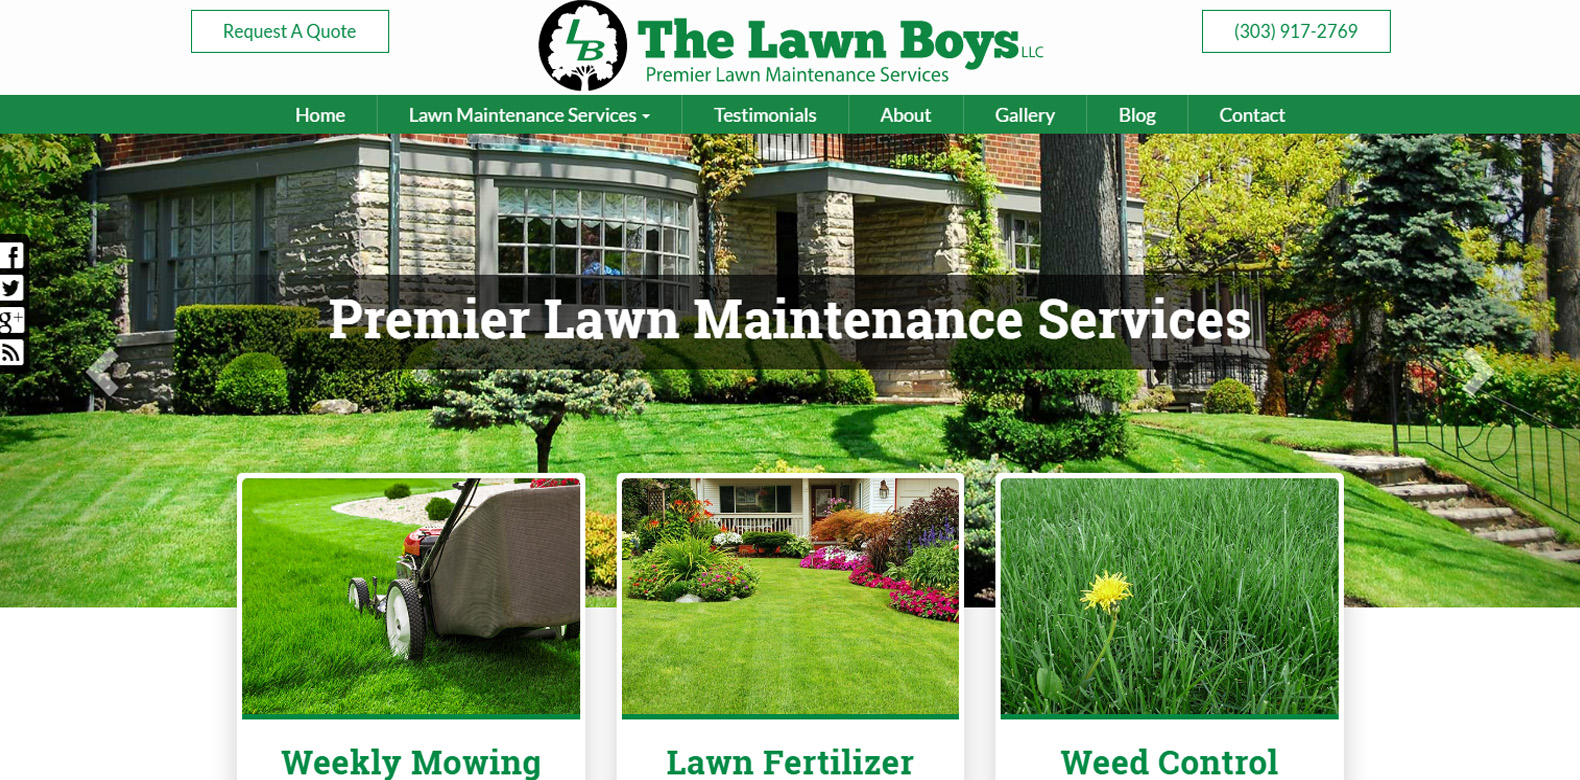 
New Upgrade Launched: The Lawn Boys